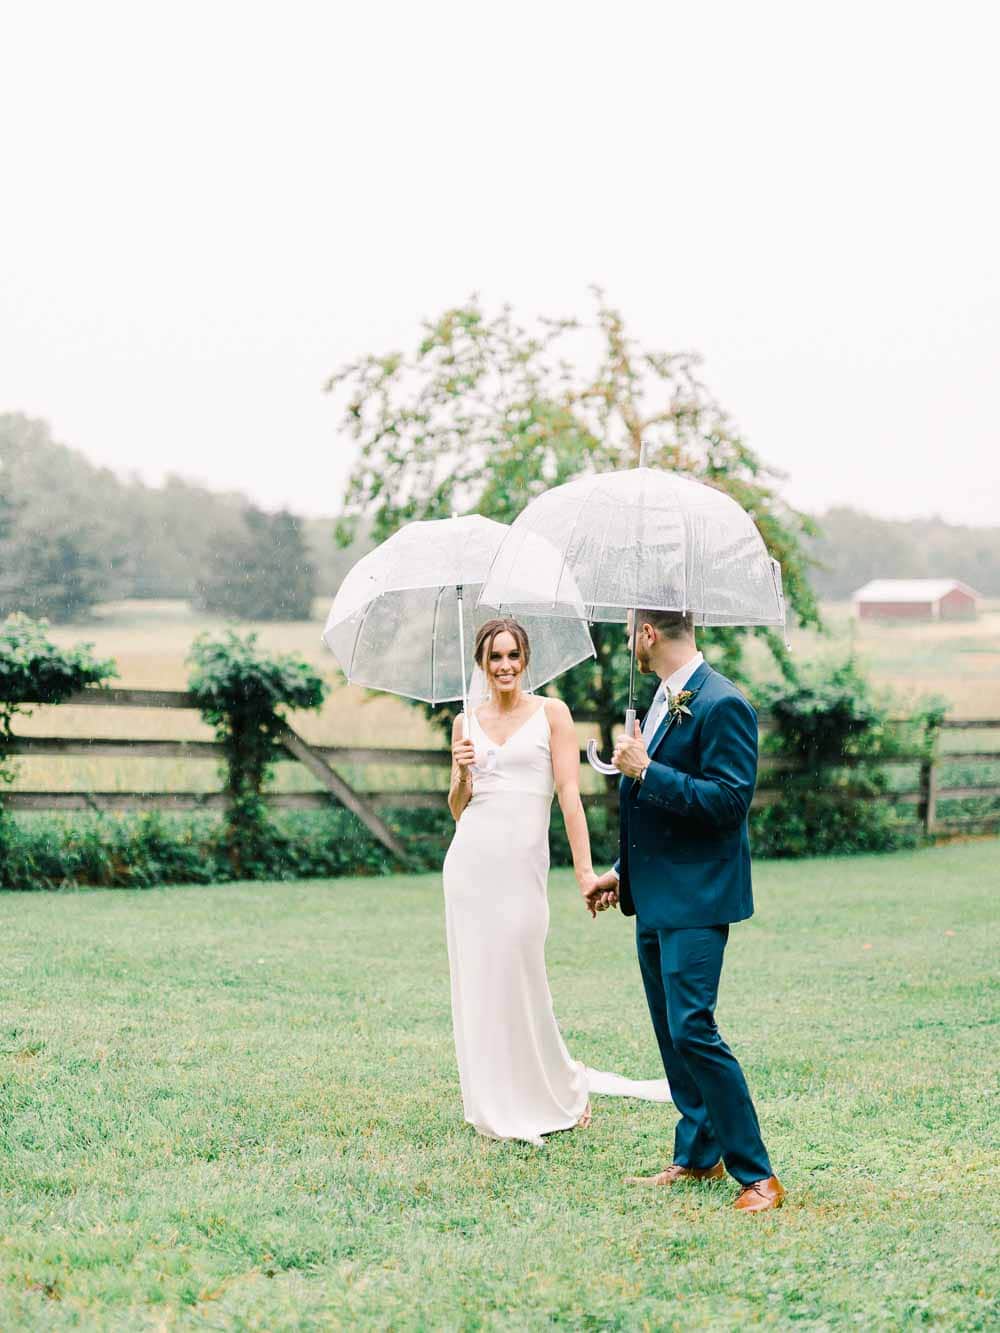 rainy bride and groom portrait during their intimate backyard wedding in cleveland Ohio